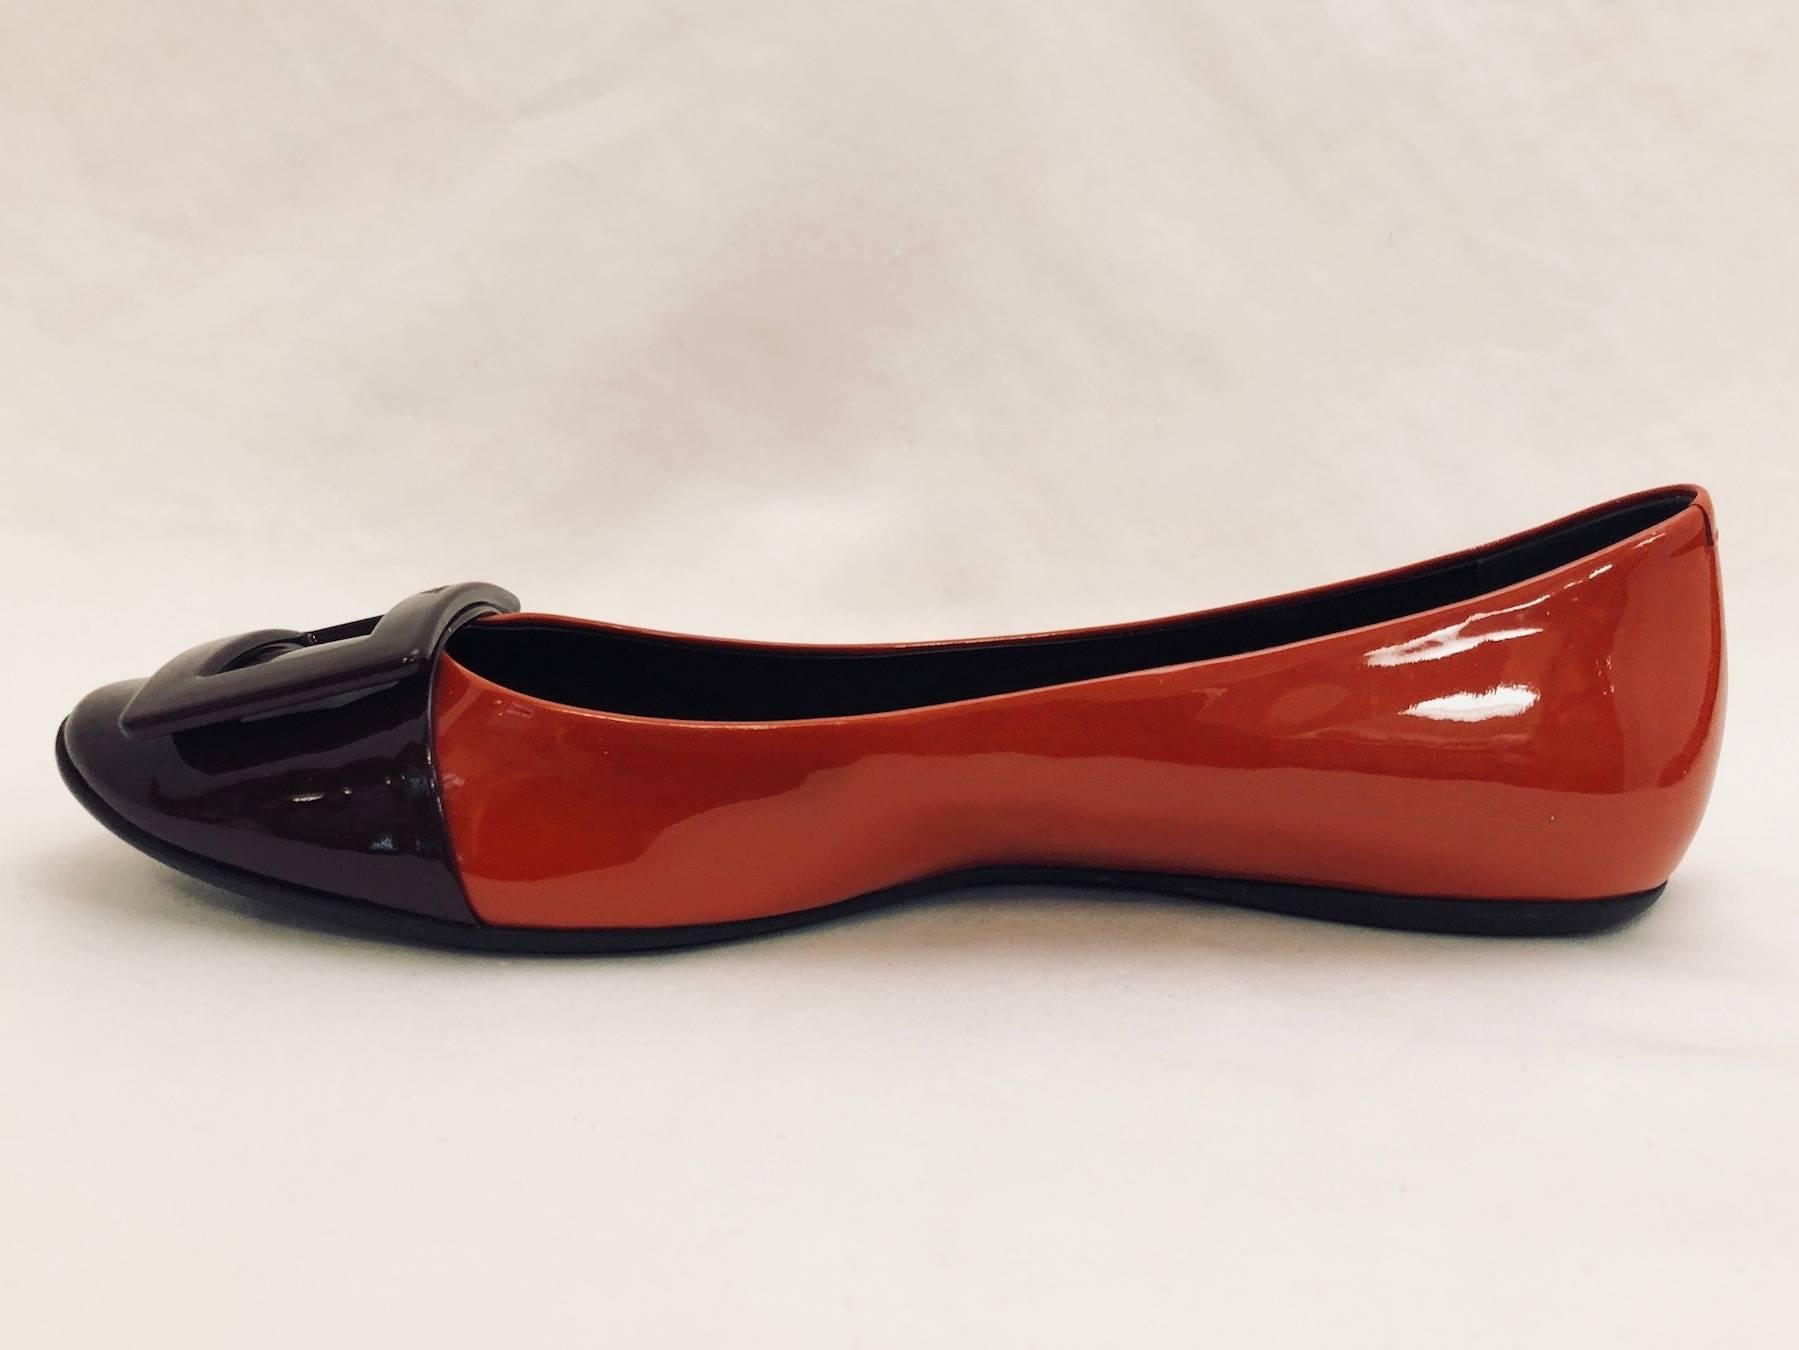 Roger Vivier is credited with creating what has become known as the Stiletto heel.  This fact makes these patent leather burnt orange and chocolate Belle de Nuit flats all the more collectible!  These have round cap toes and are lined in black